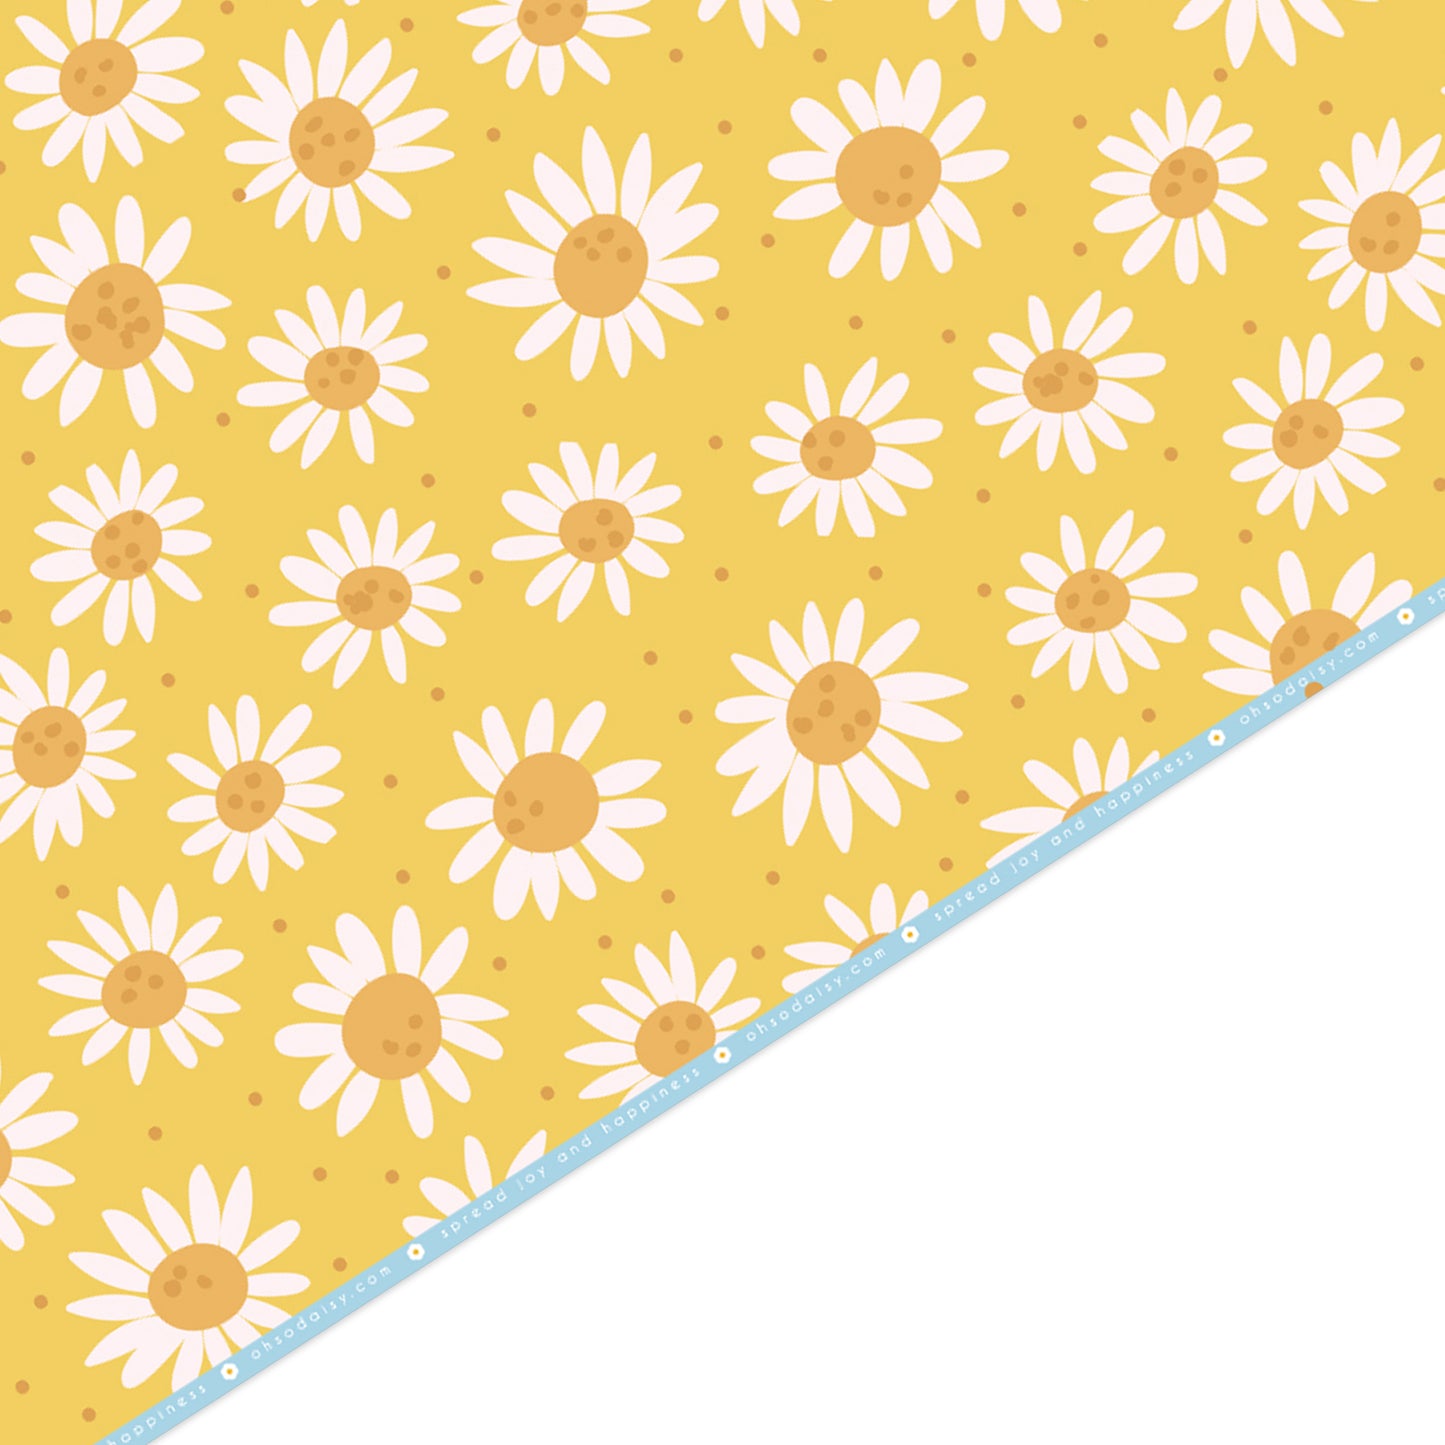 BLOOMING LOVELY DAISY GIFT WRAP SHEET